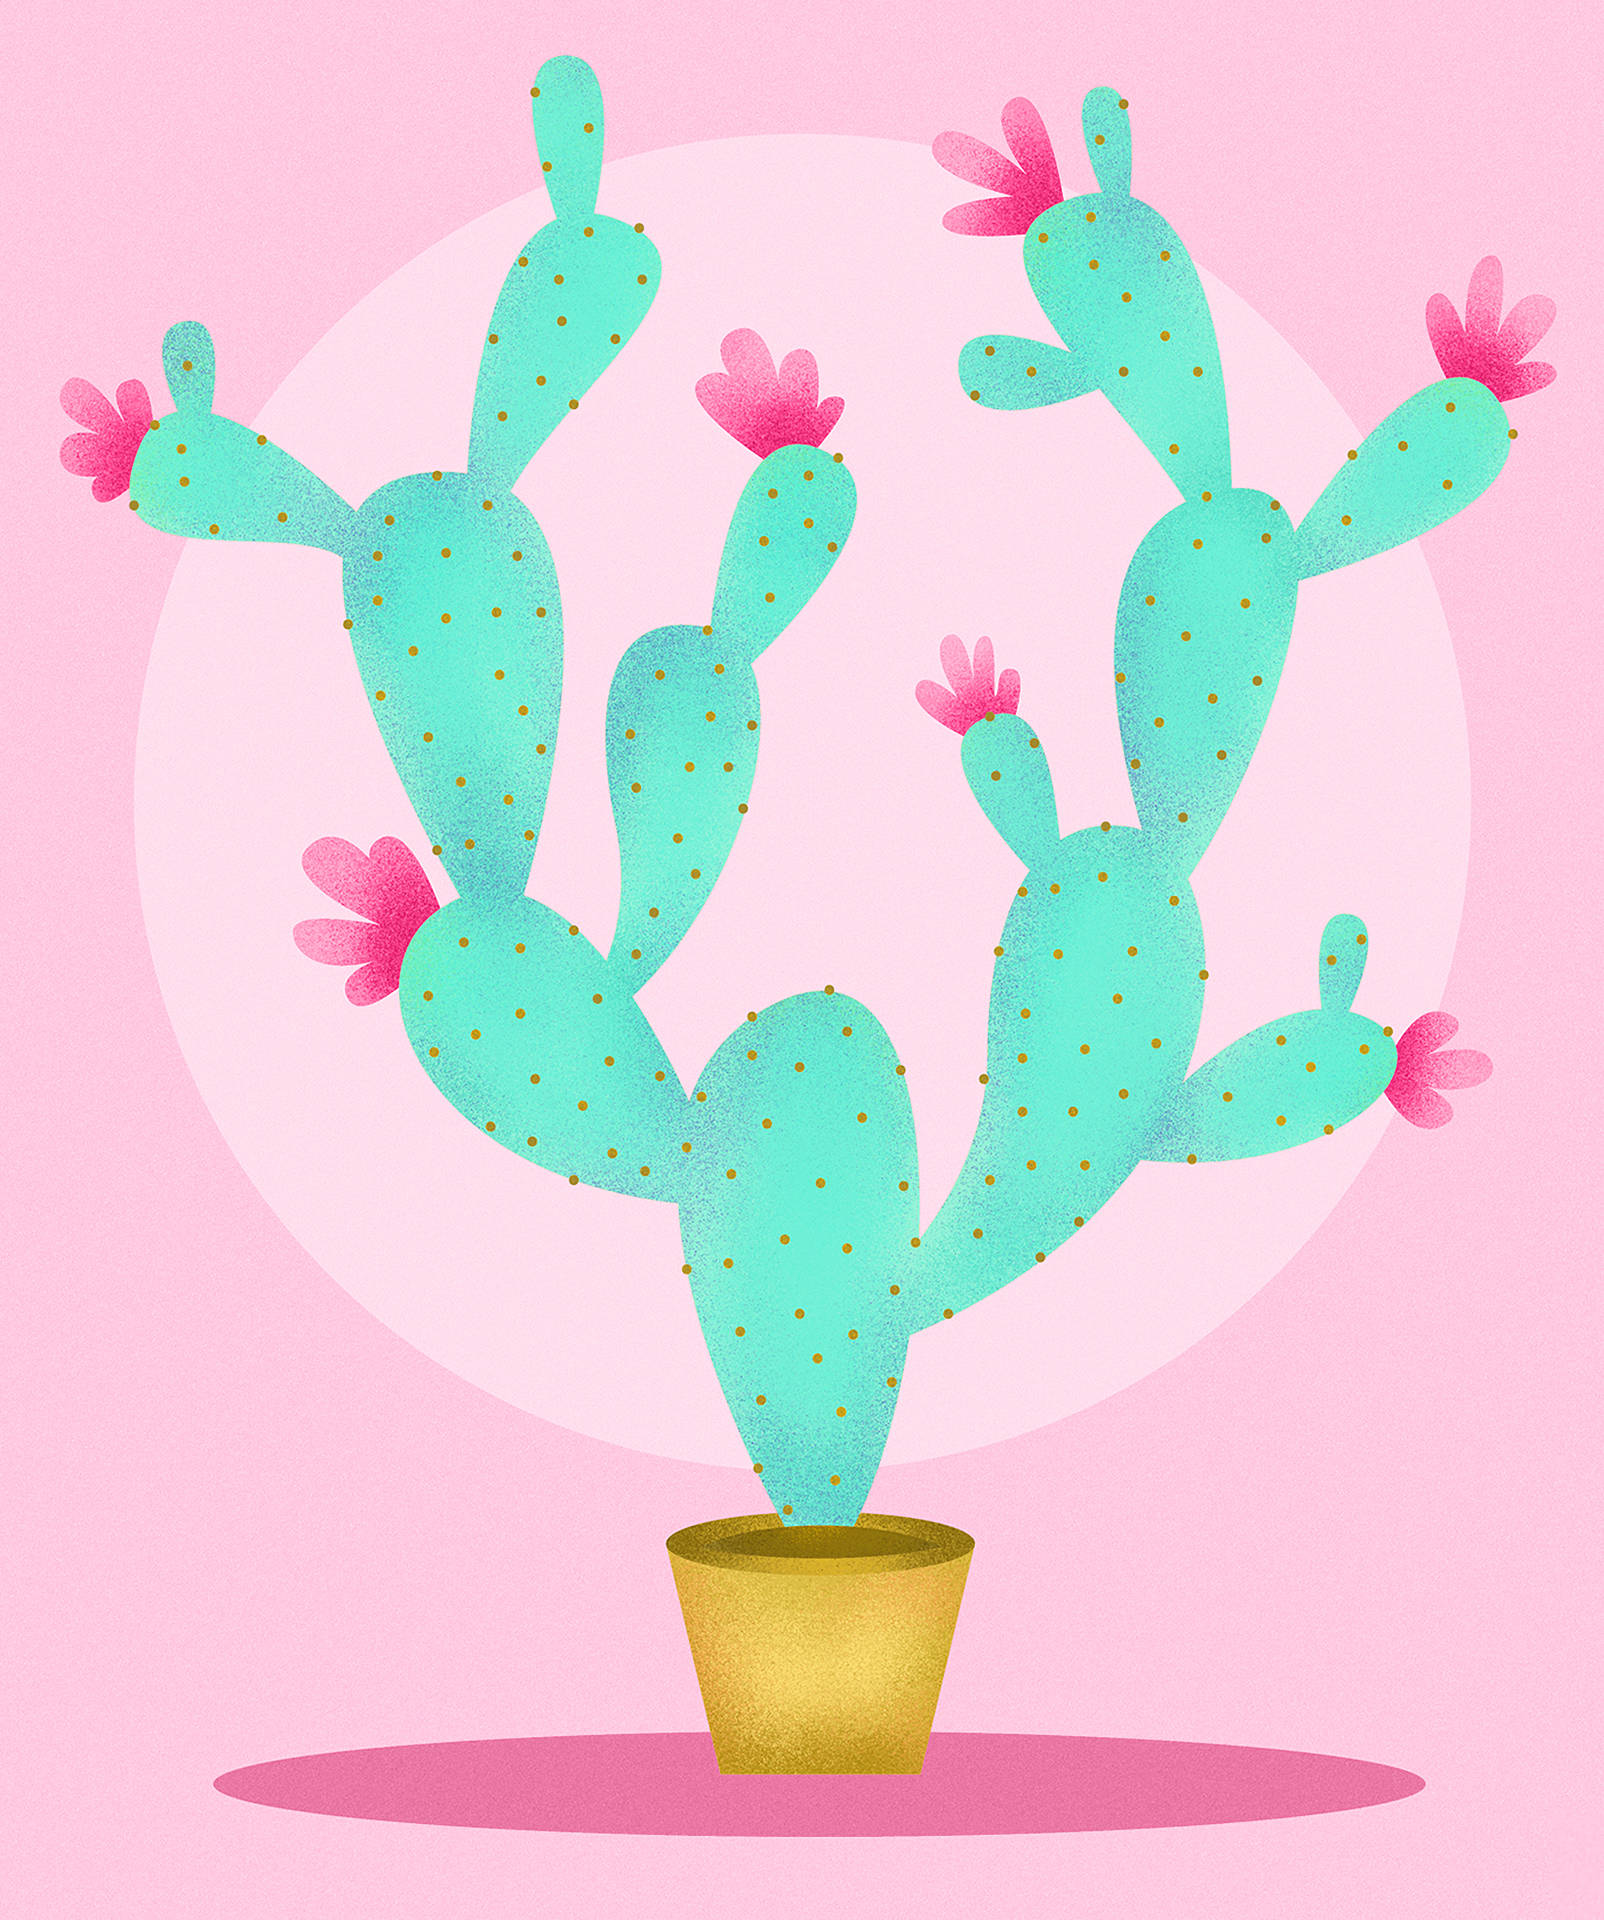 Cactus 2730X3268 Wallpaper and Background Image